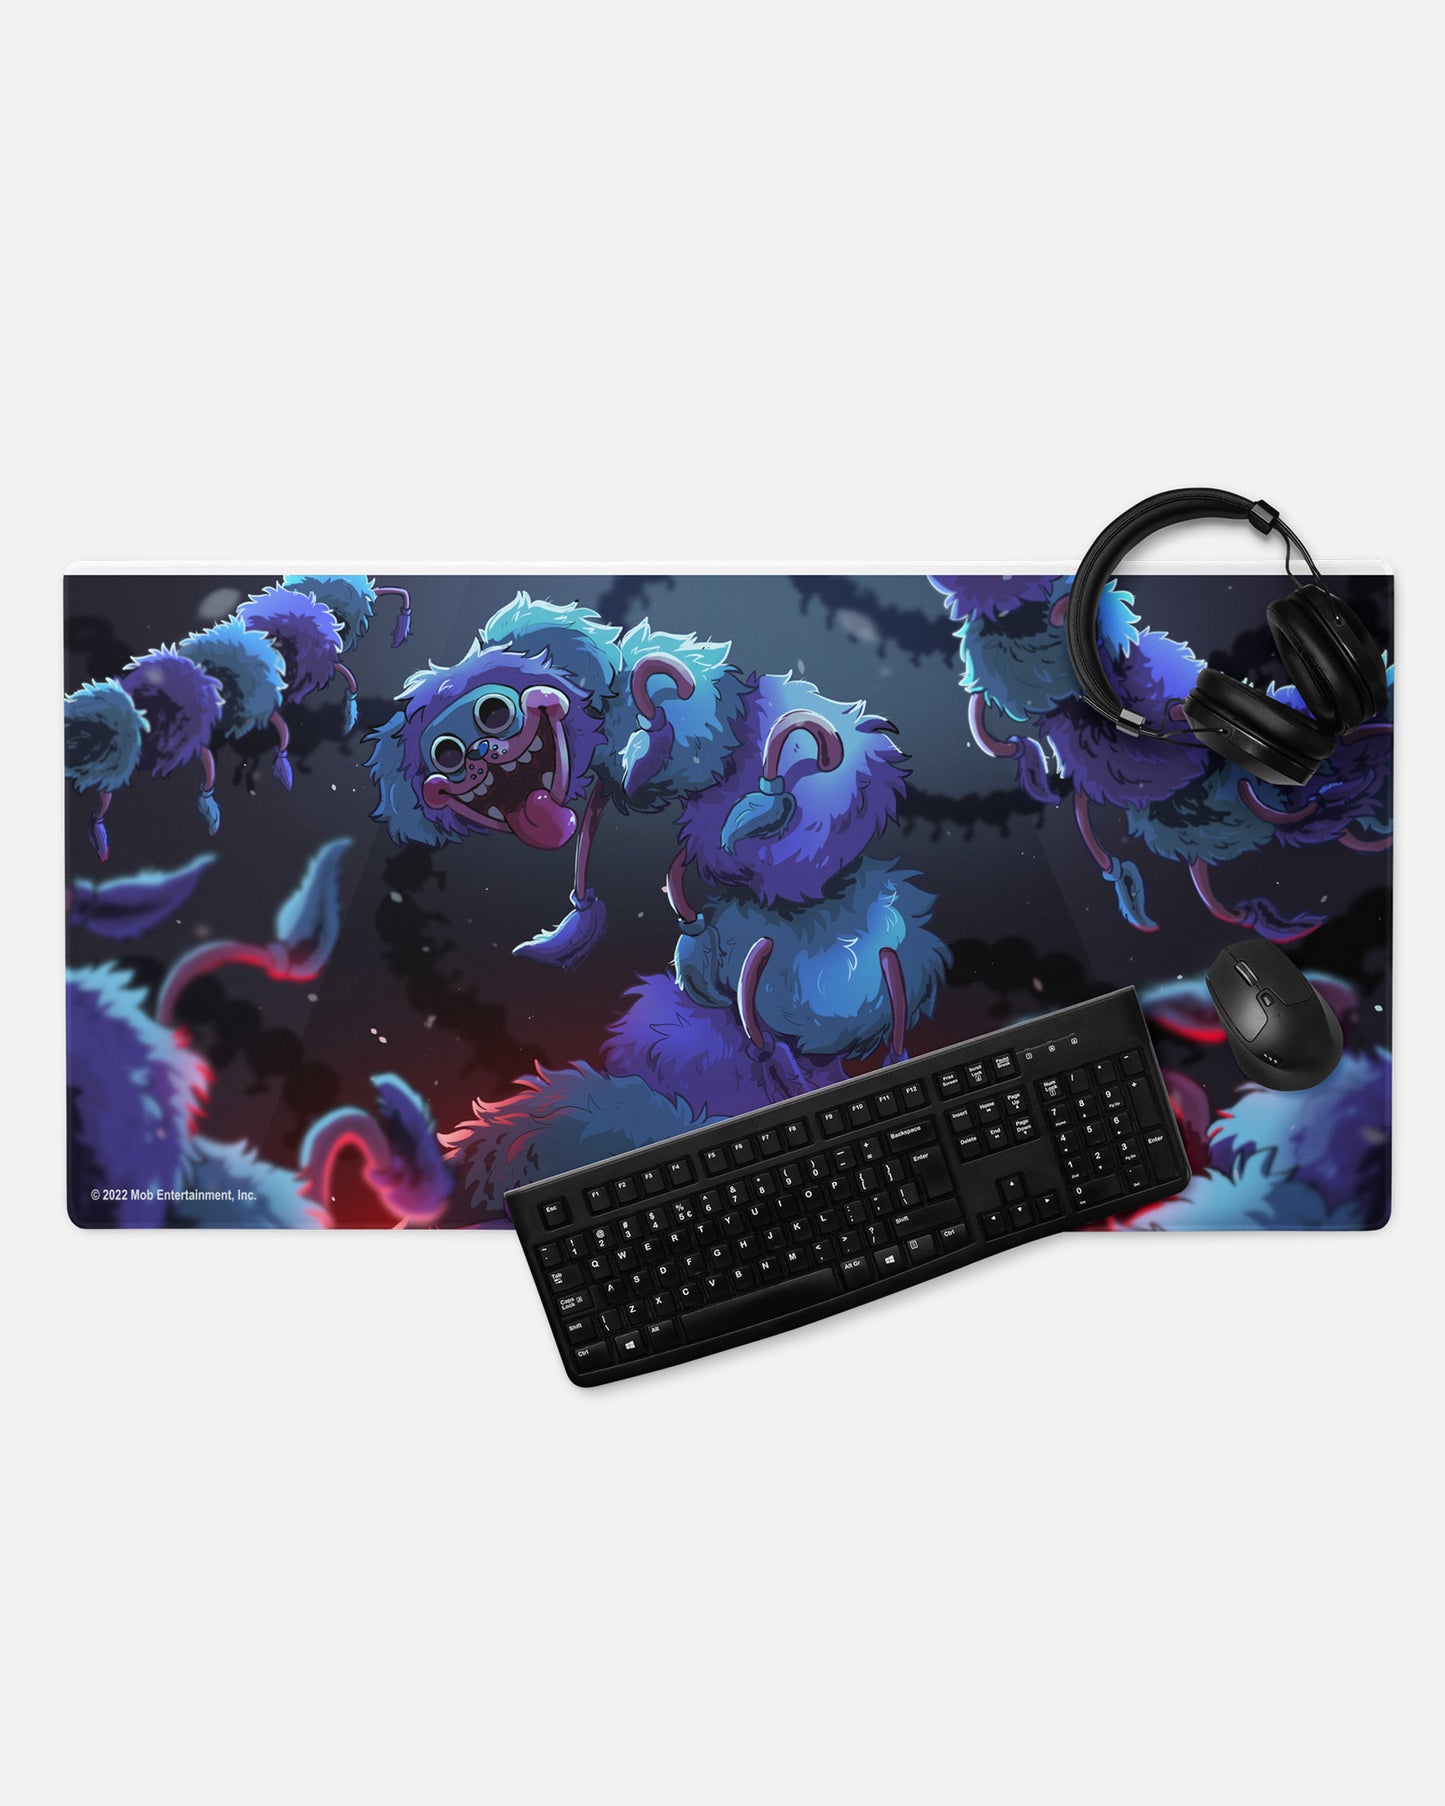 pj pugapillar gamer mousepad with headphones, keyboard, and mouse to show example of gaming set up. image: long body pj pugapillar with body taking up all of image